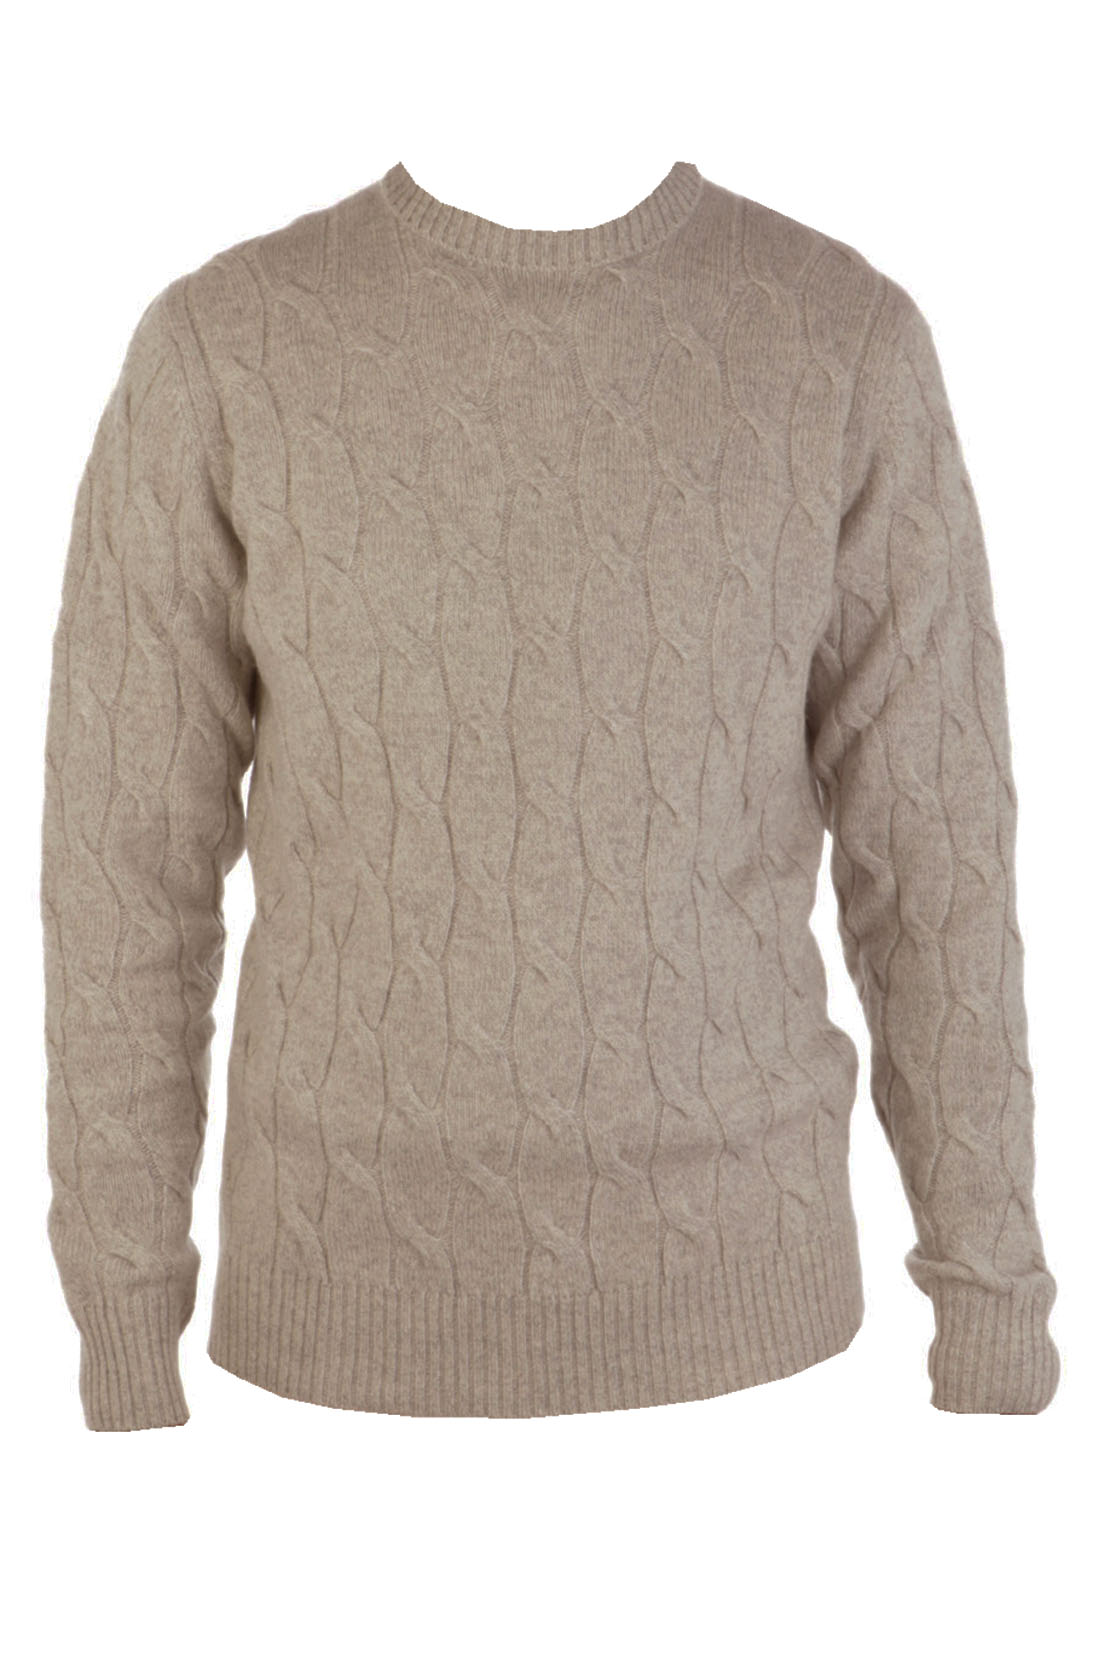 FILIPPO DE LAURENTIIS - Marled Biscuit Wool & Cashmere Cable Knit Sweater GC3ML 910